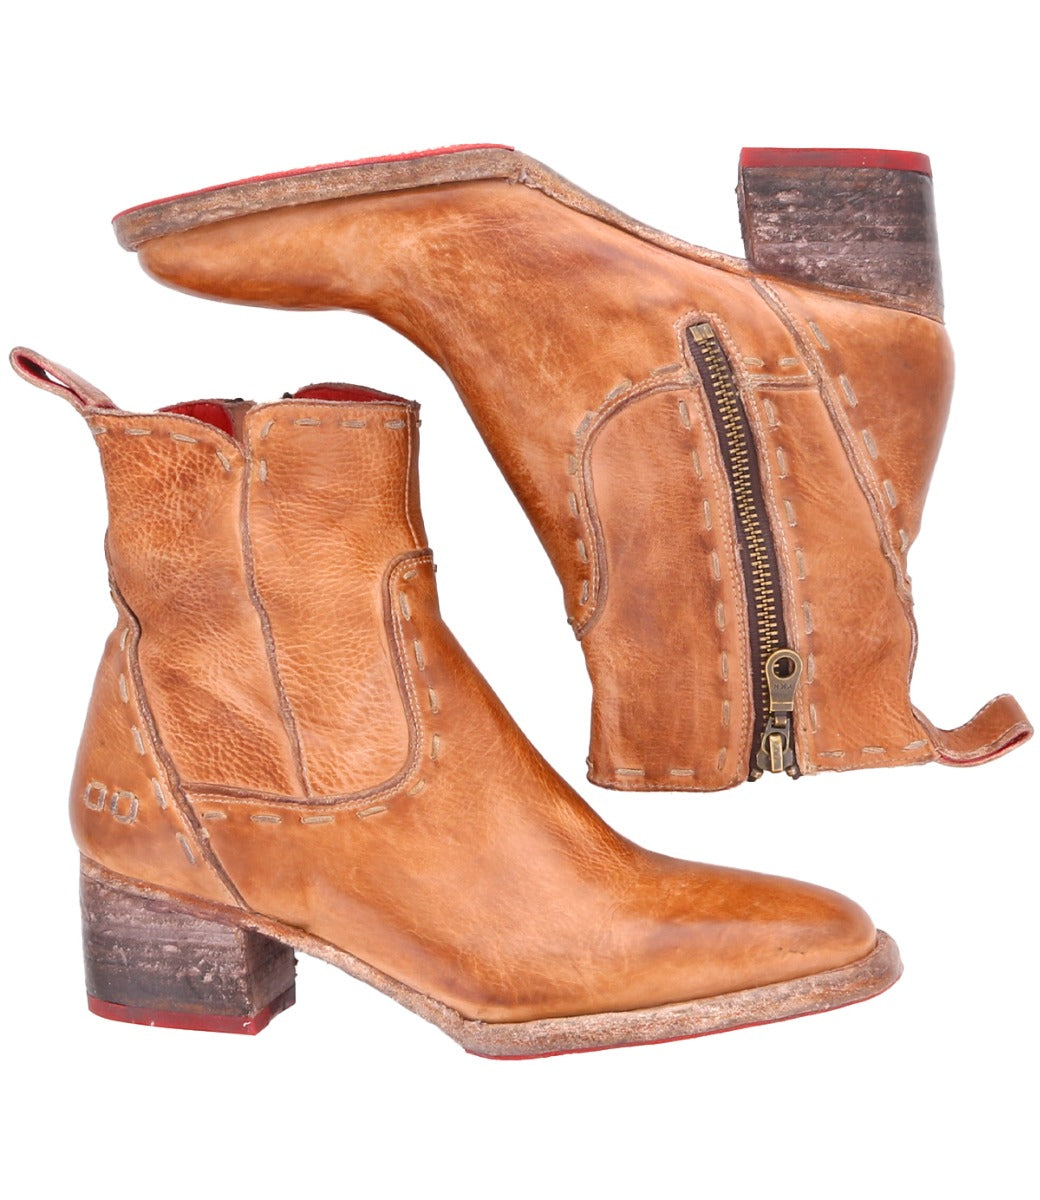 A pair of Merryli ankle boots from Bed Stu.